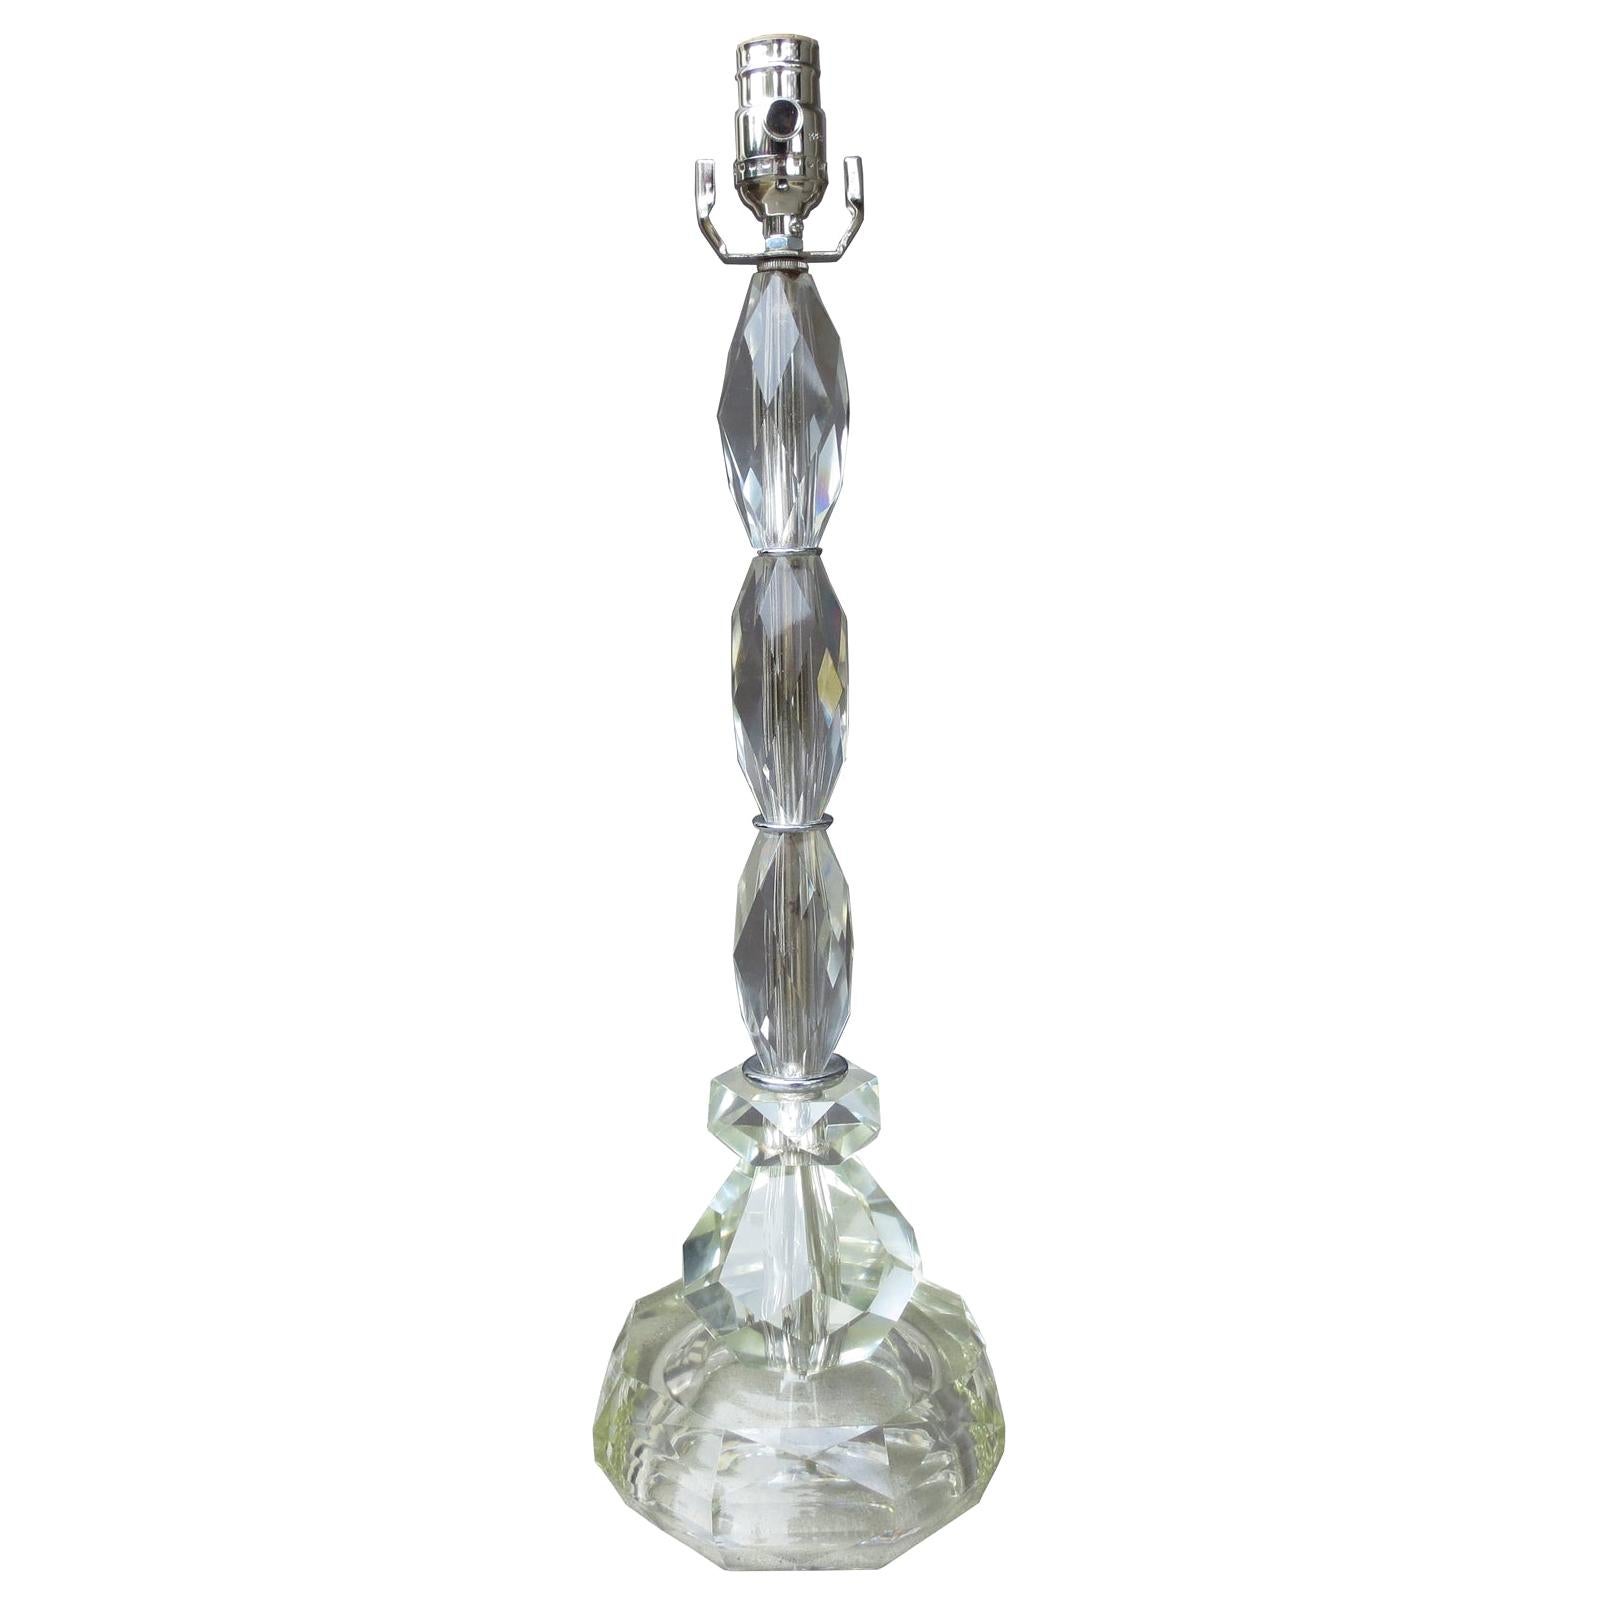 Mid-20th Century Crystal Lamp For Sale